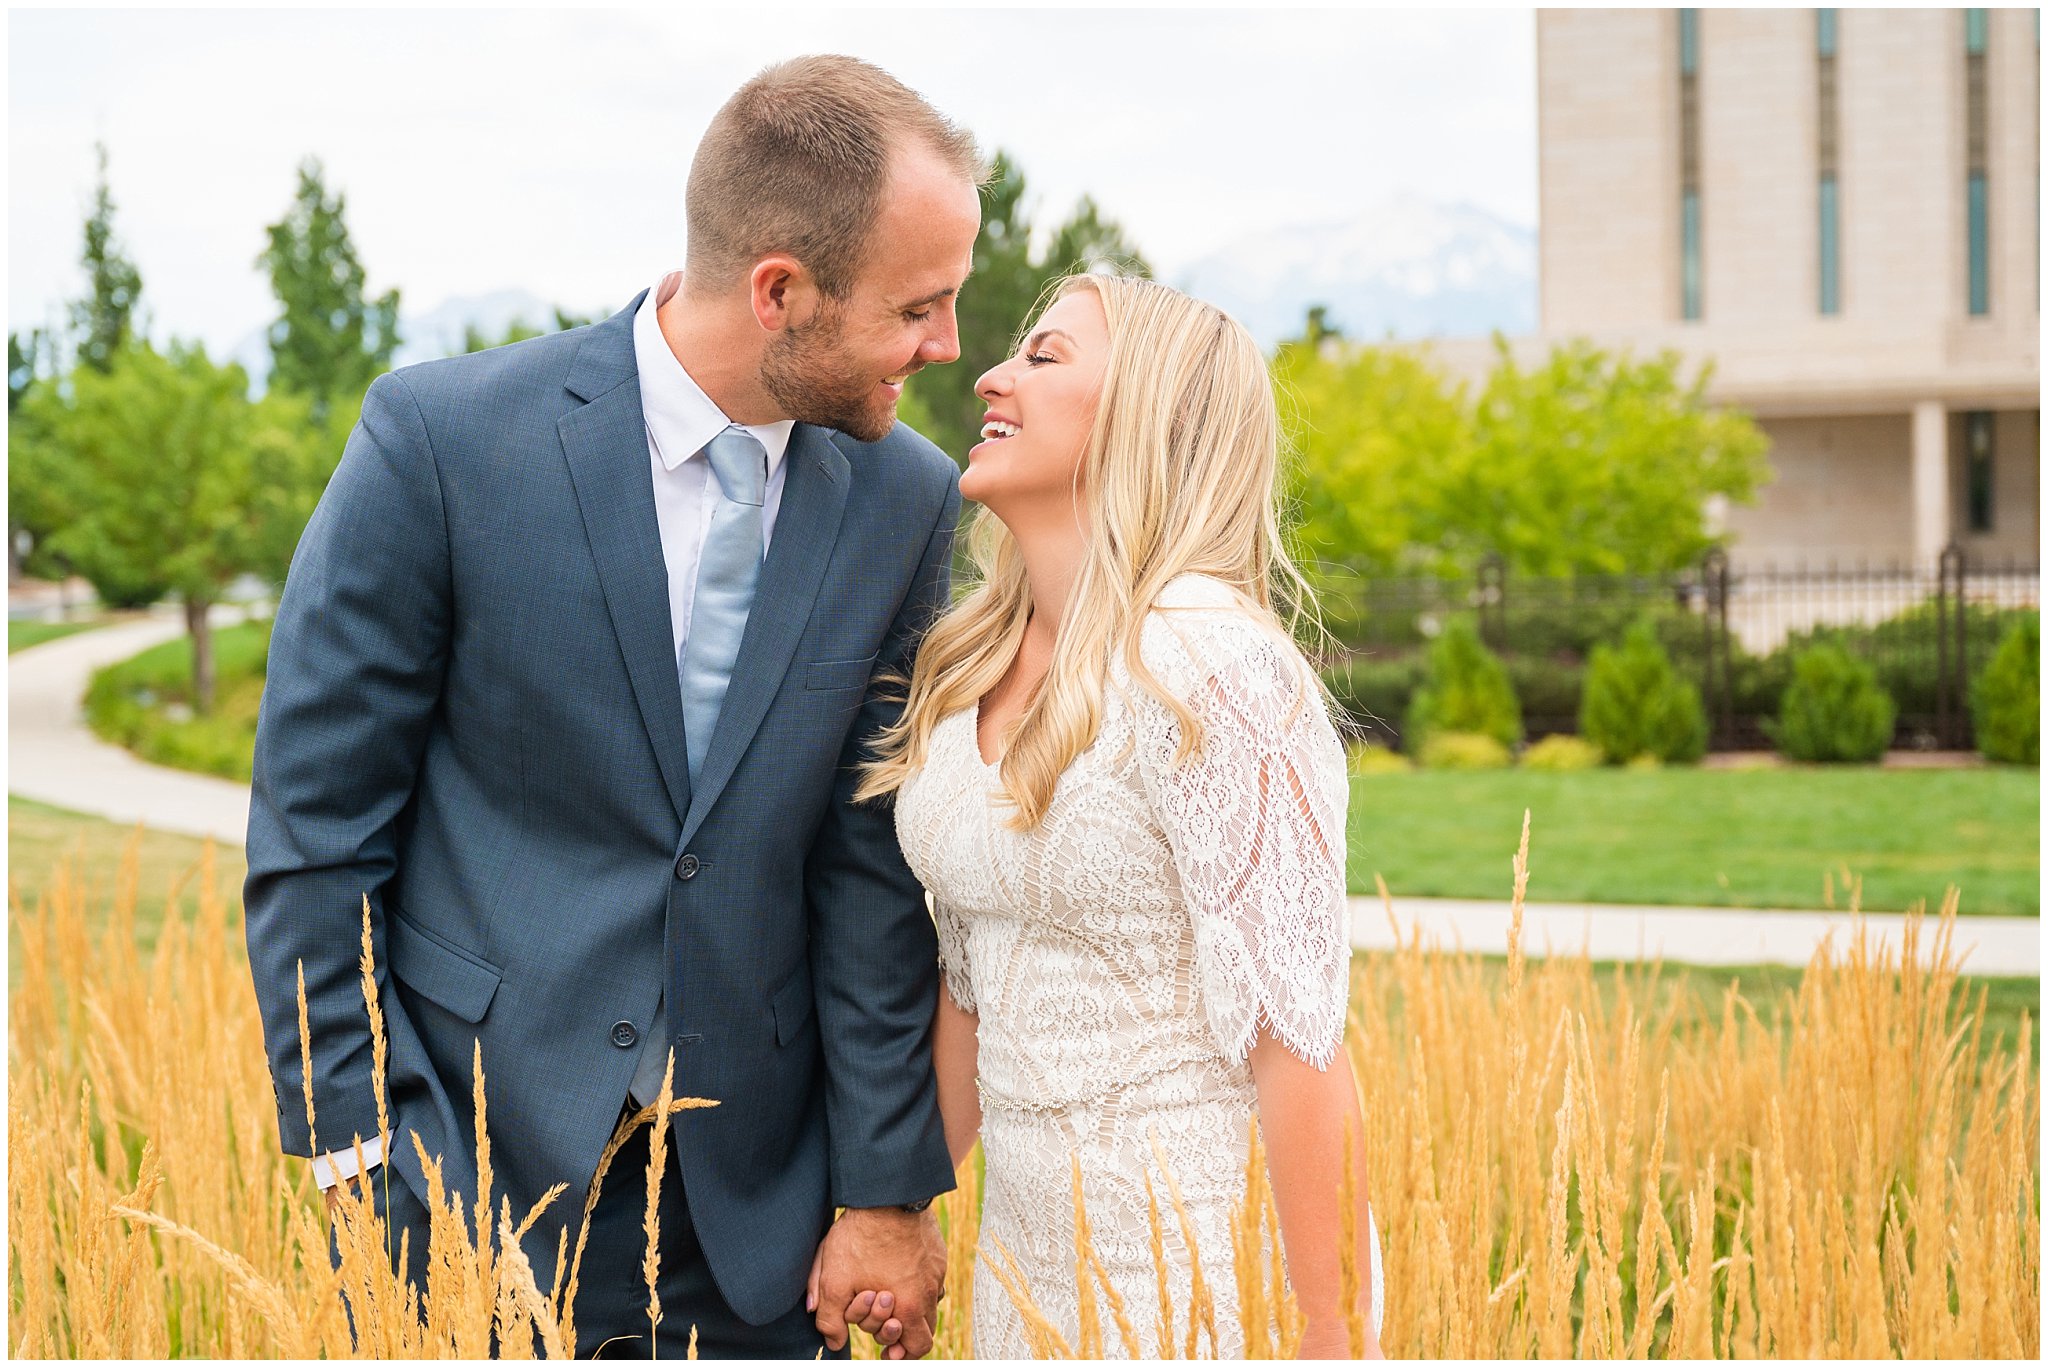 Couple portraits at the Oquirrh Mountain temple | Summer Carnival and Oquirrh Mountain Temple Wedding | Jessie and Dallin Photography